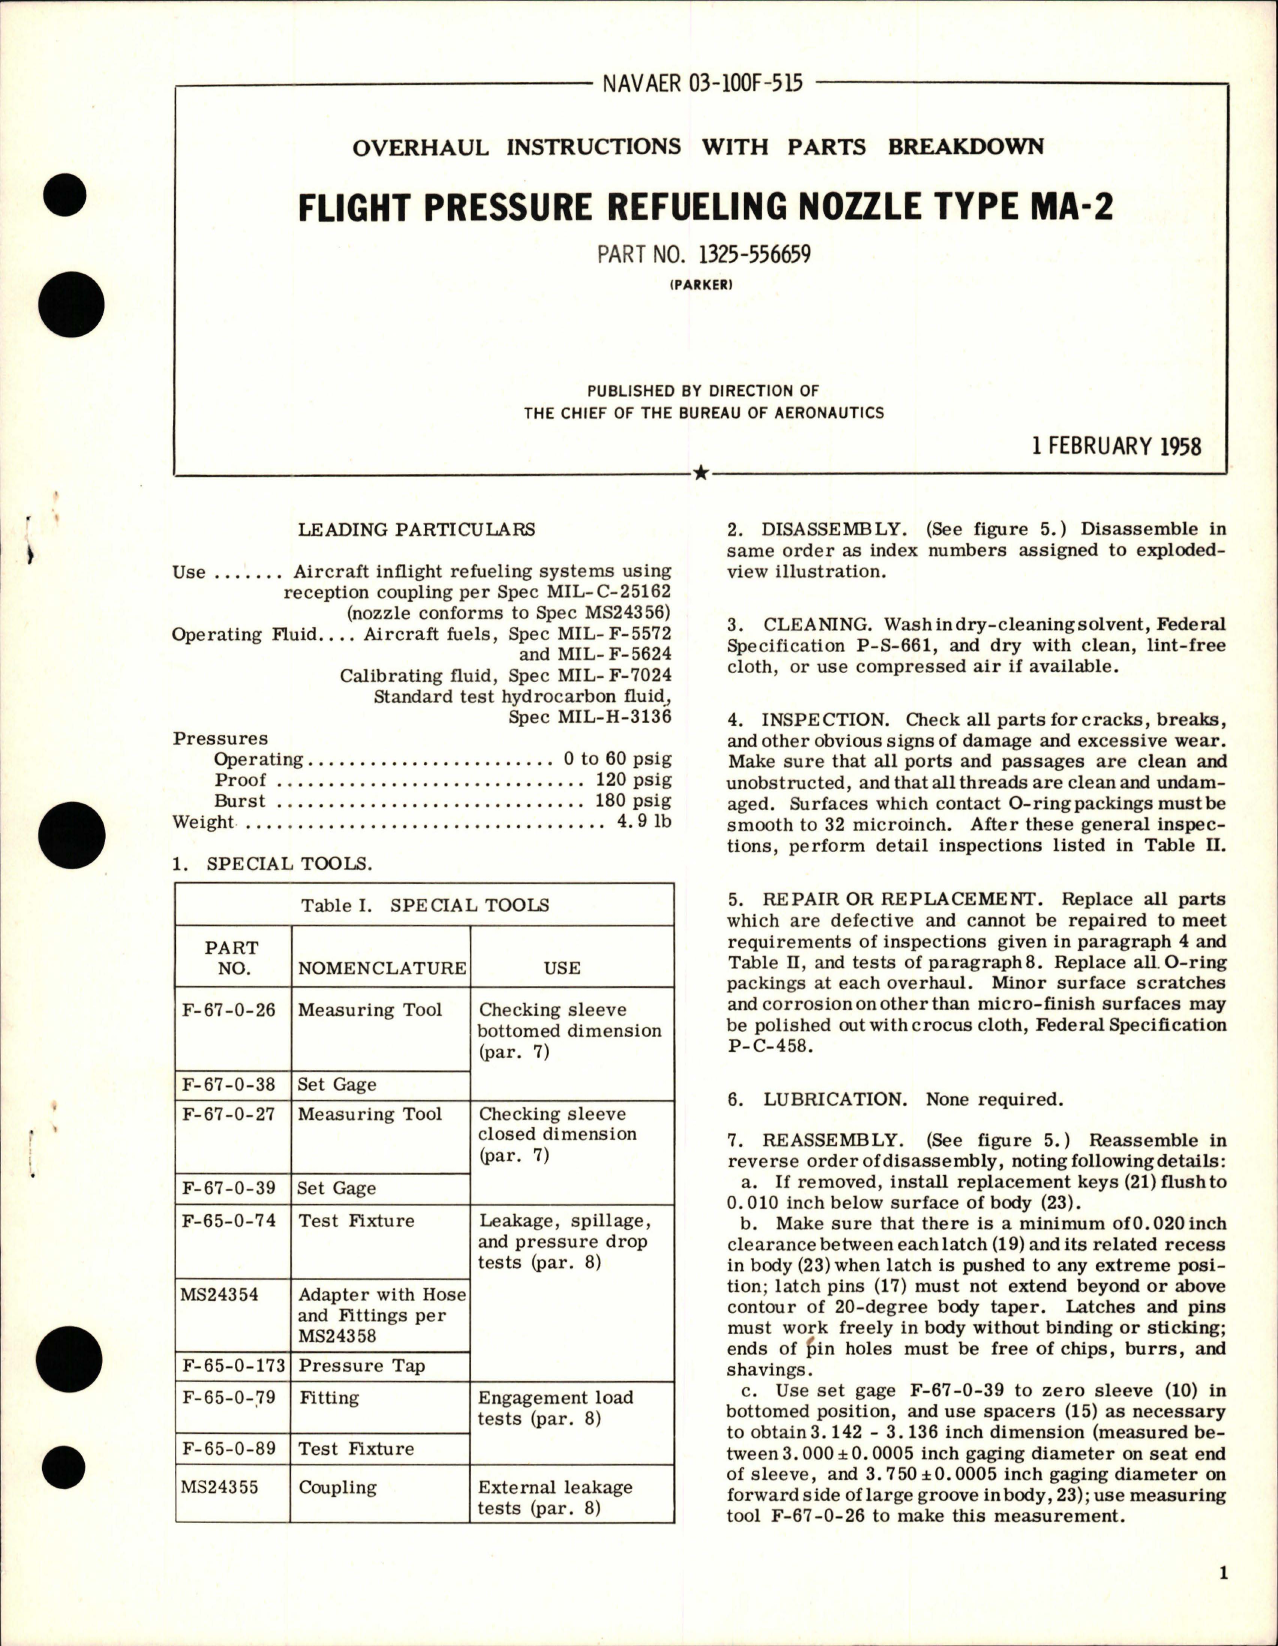 Sample page 1 from AirCorps Library document: Overhaul Instructions with Parts Breakdown for Flight Pressure Refueling Nozzle Type MA-2 - Part 1325-556659